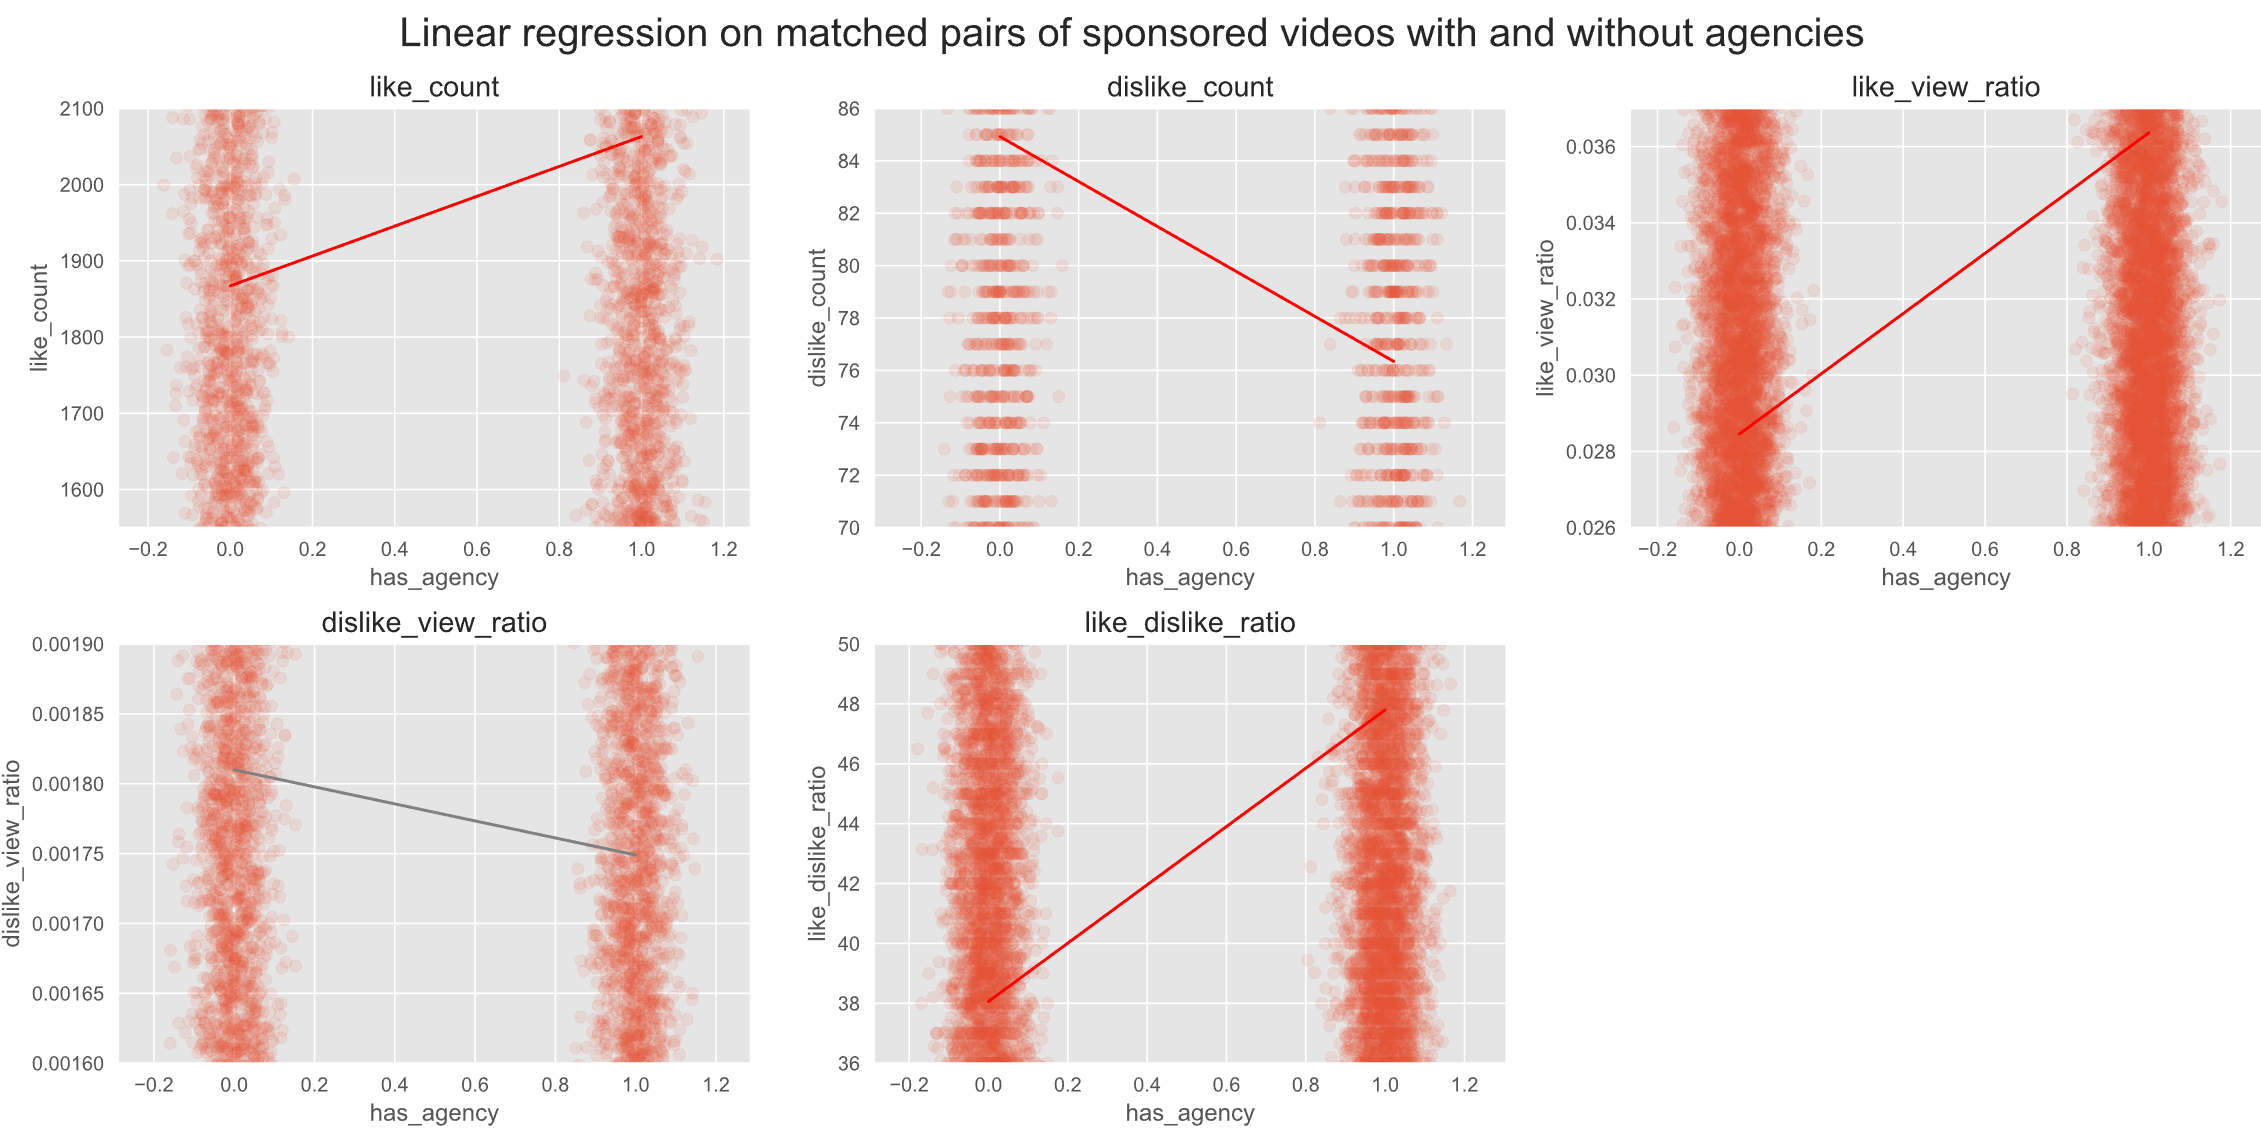 Plot of linear regression on agency-matched pairs